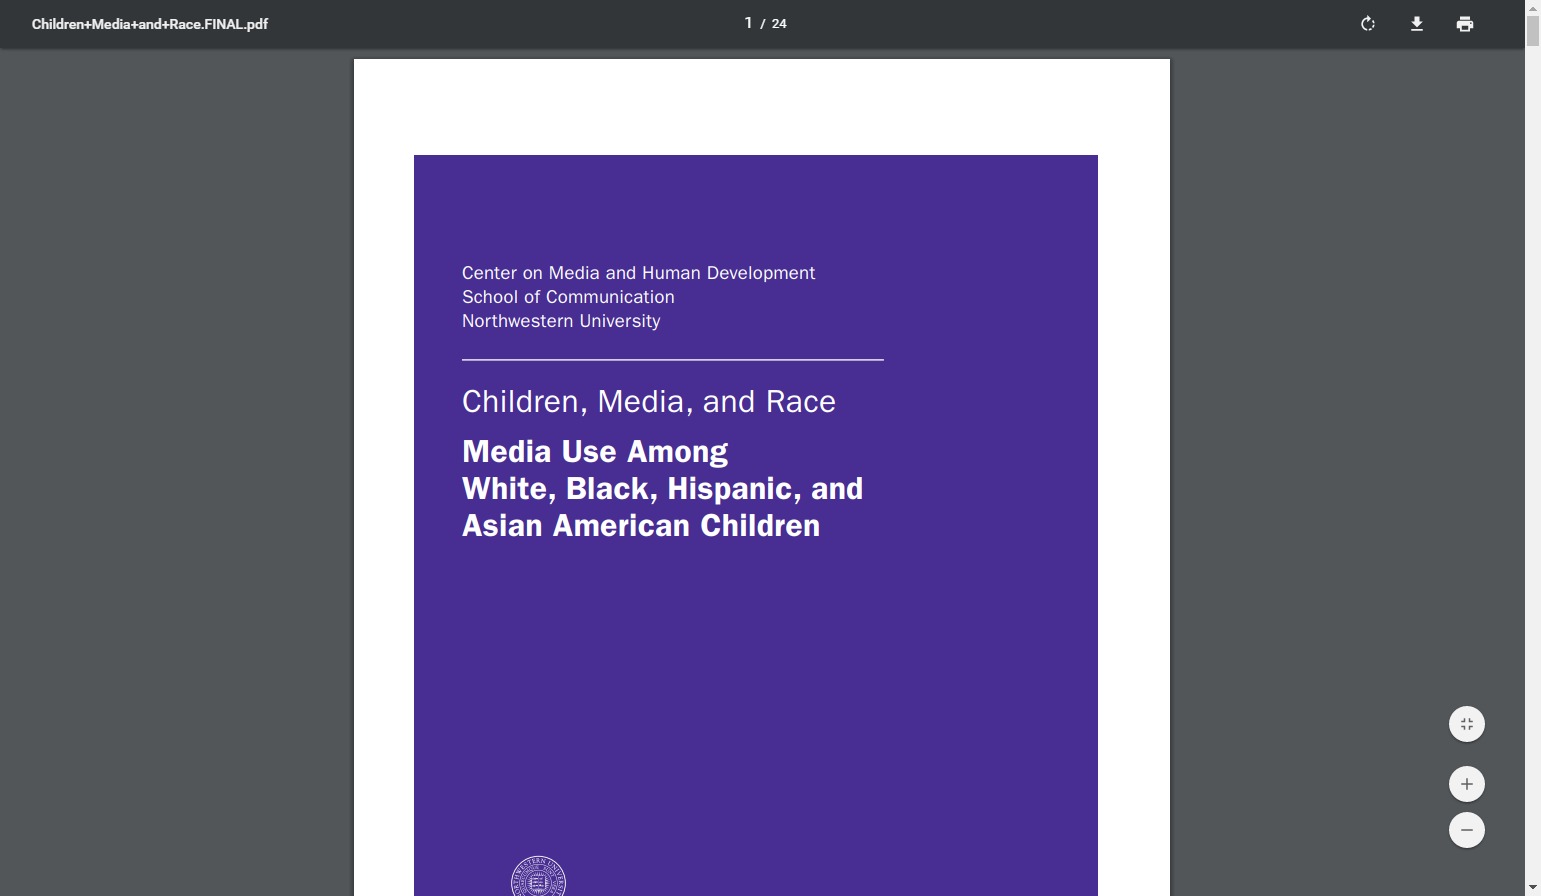 Image from: Children, Media, and Race: Media Use Among White, Black, Hispanic, and Asian American Children